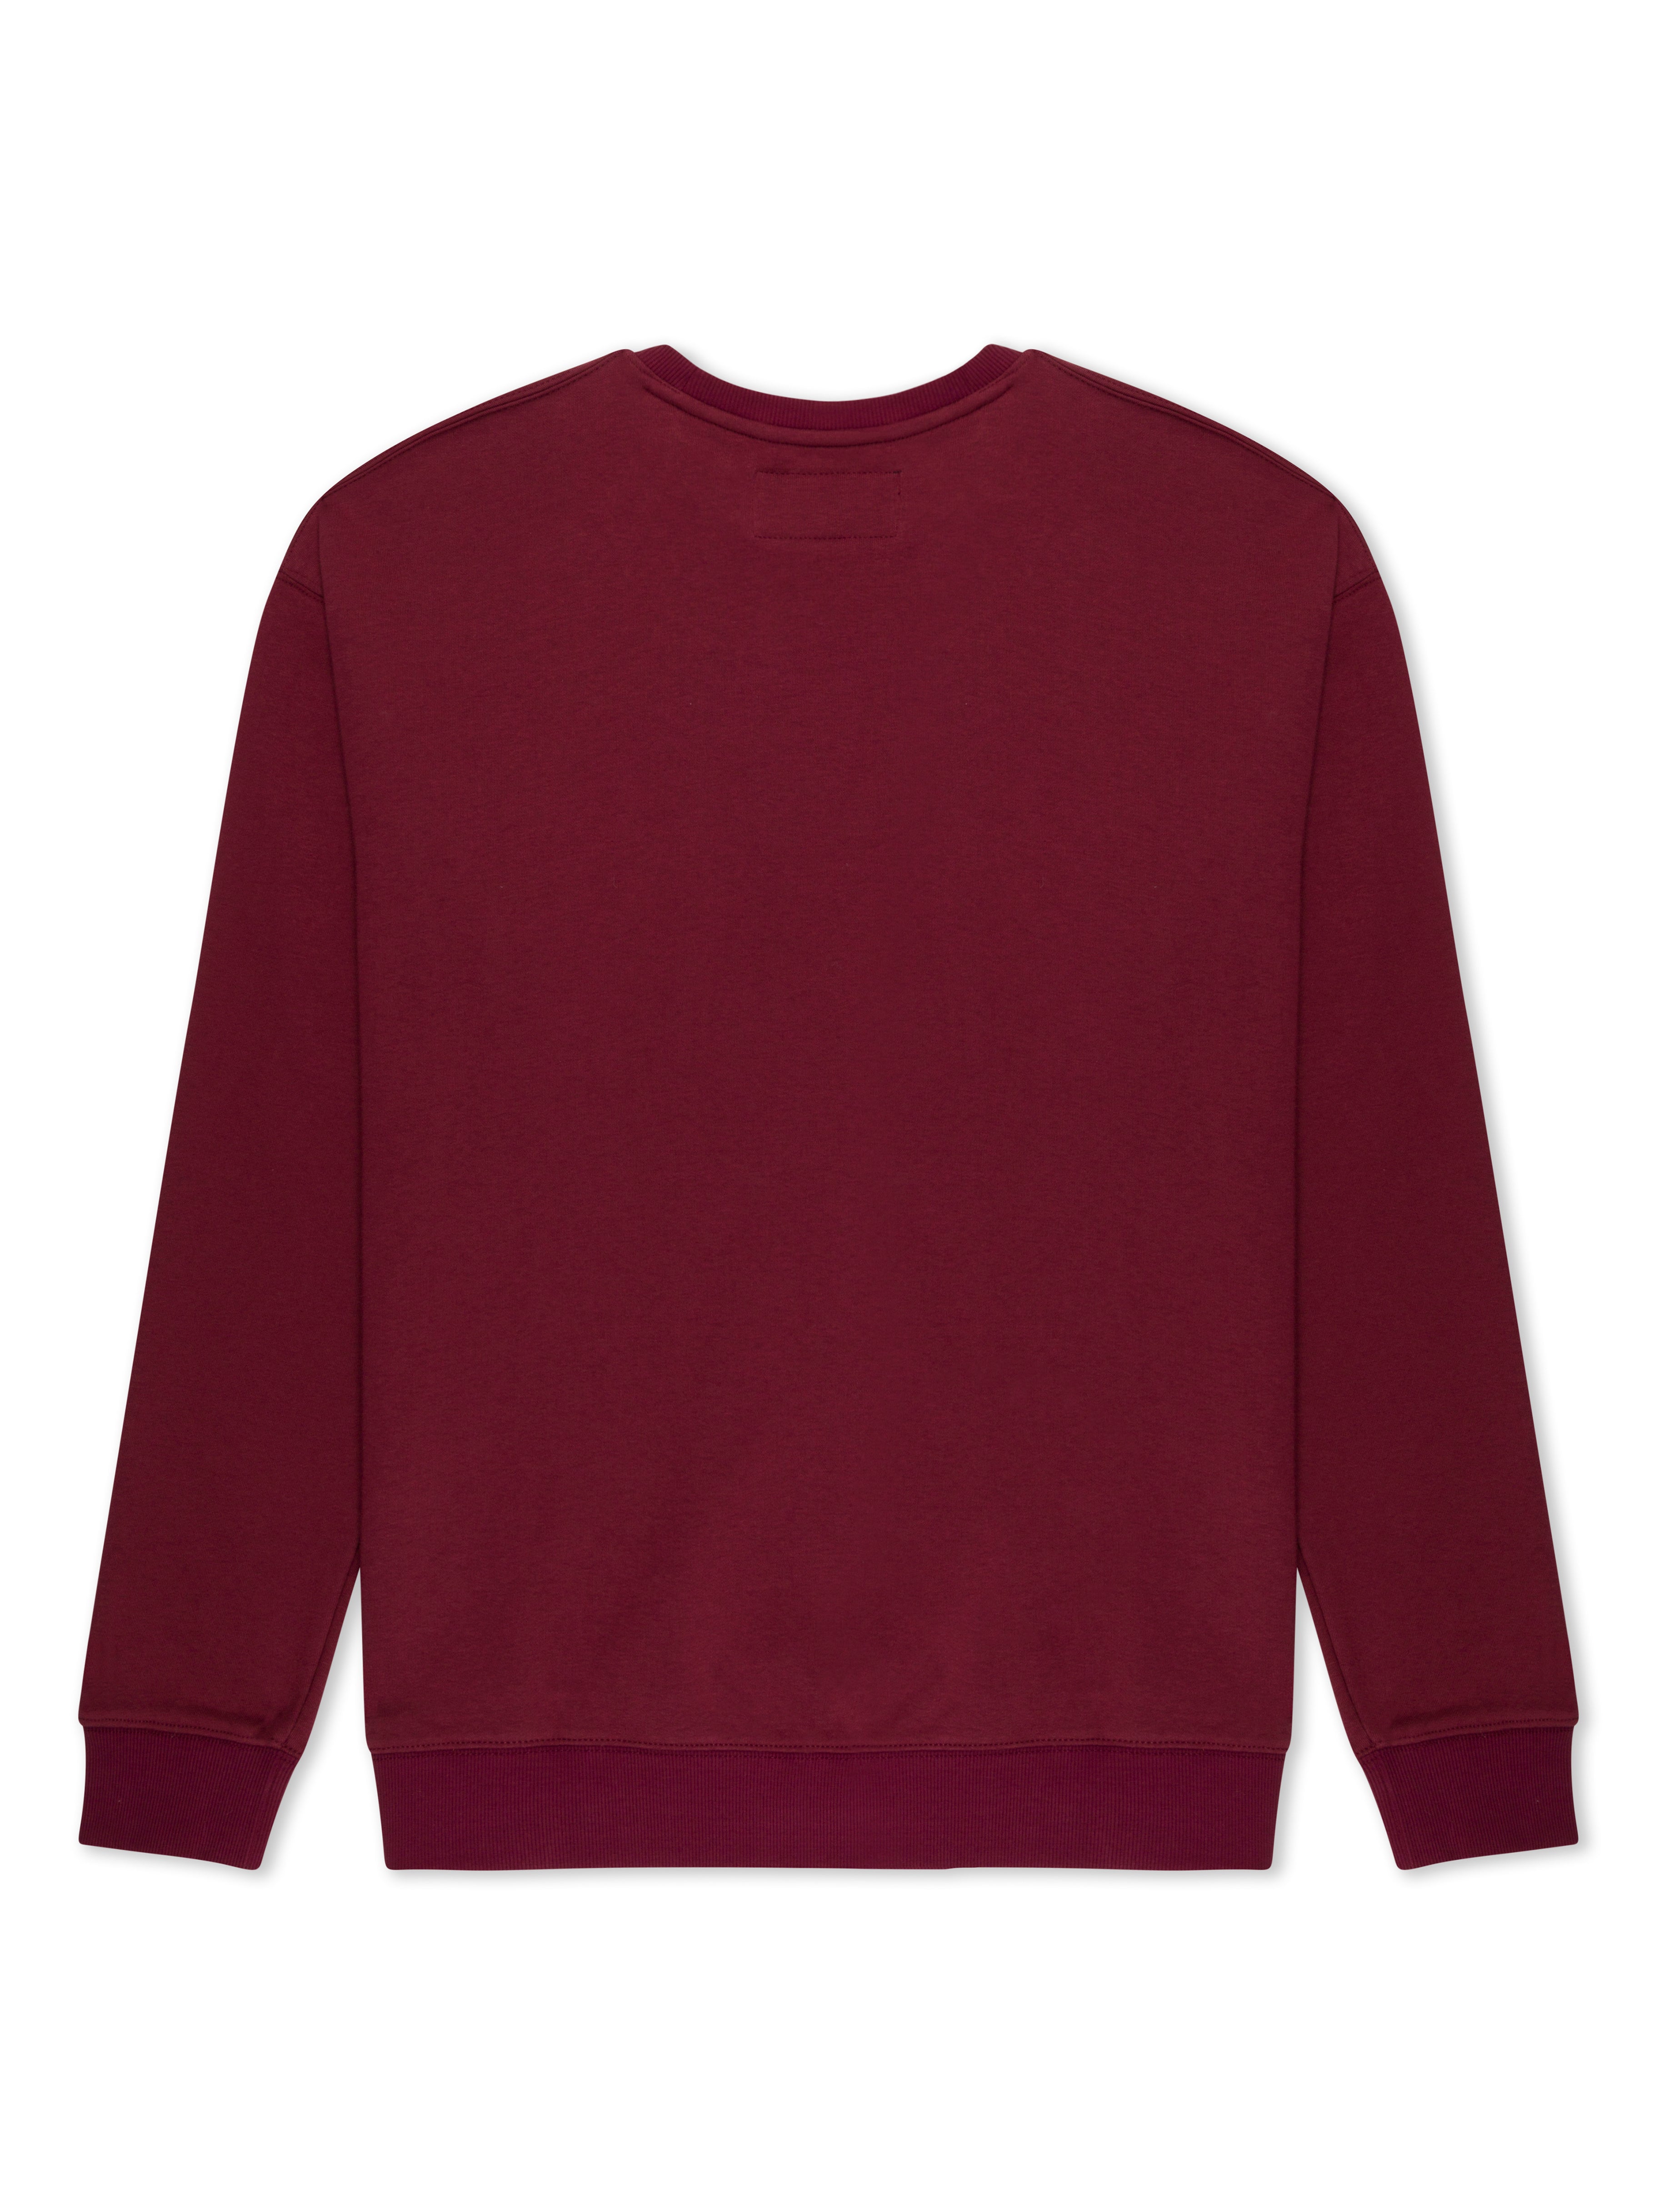 Sol Gym Cotton Long Sleeve Sweater, Maroon